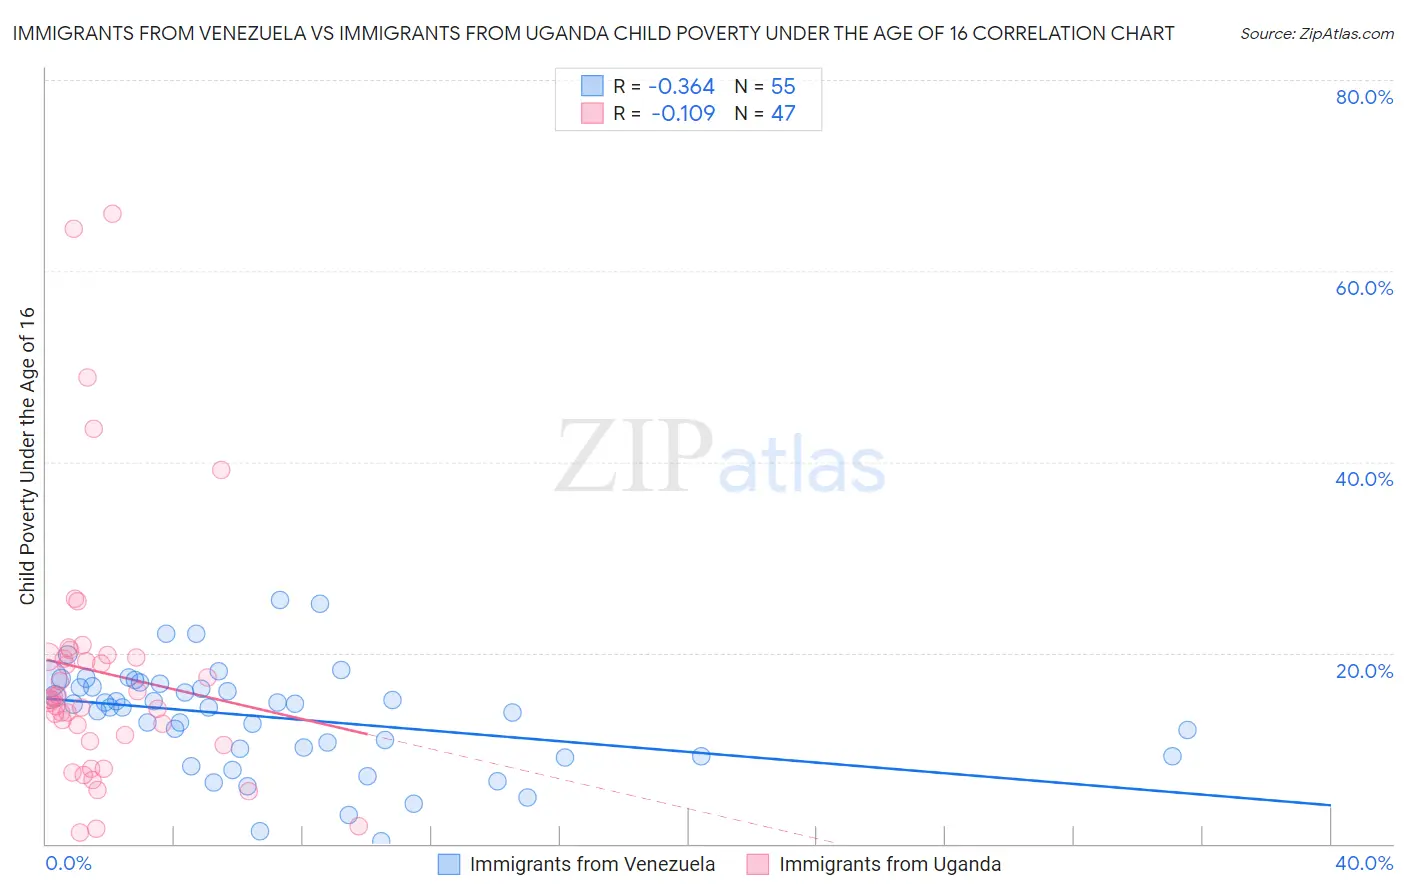 Immigrants from Venezuela vs Immigrants from Uganda Child Poverty Under the Age of 16